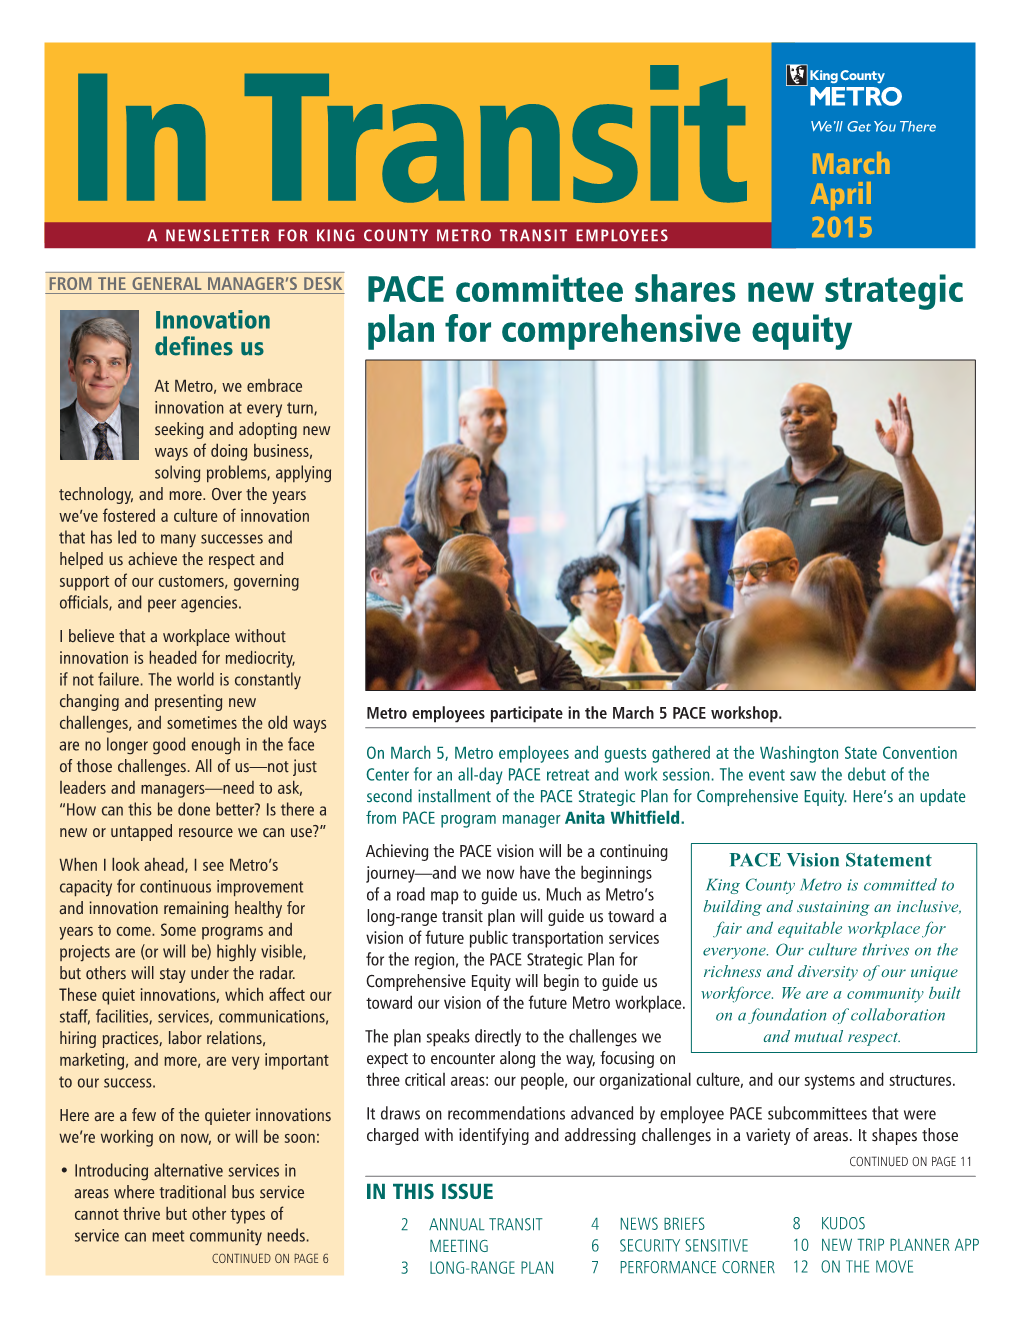 PACE Committee Shares New Strategic Plan for Comprehensive Equity